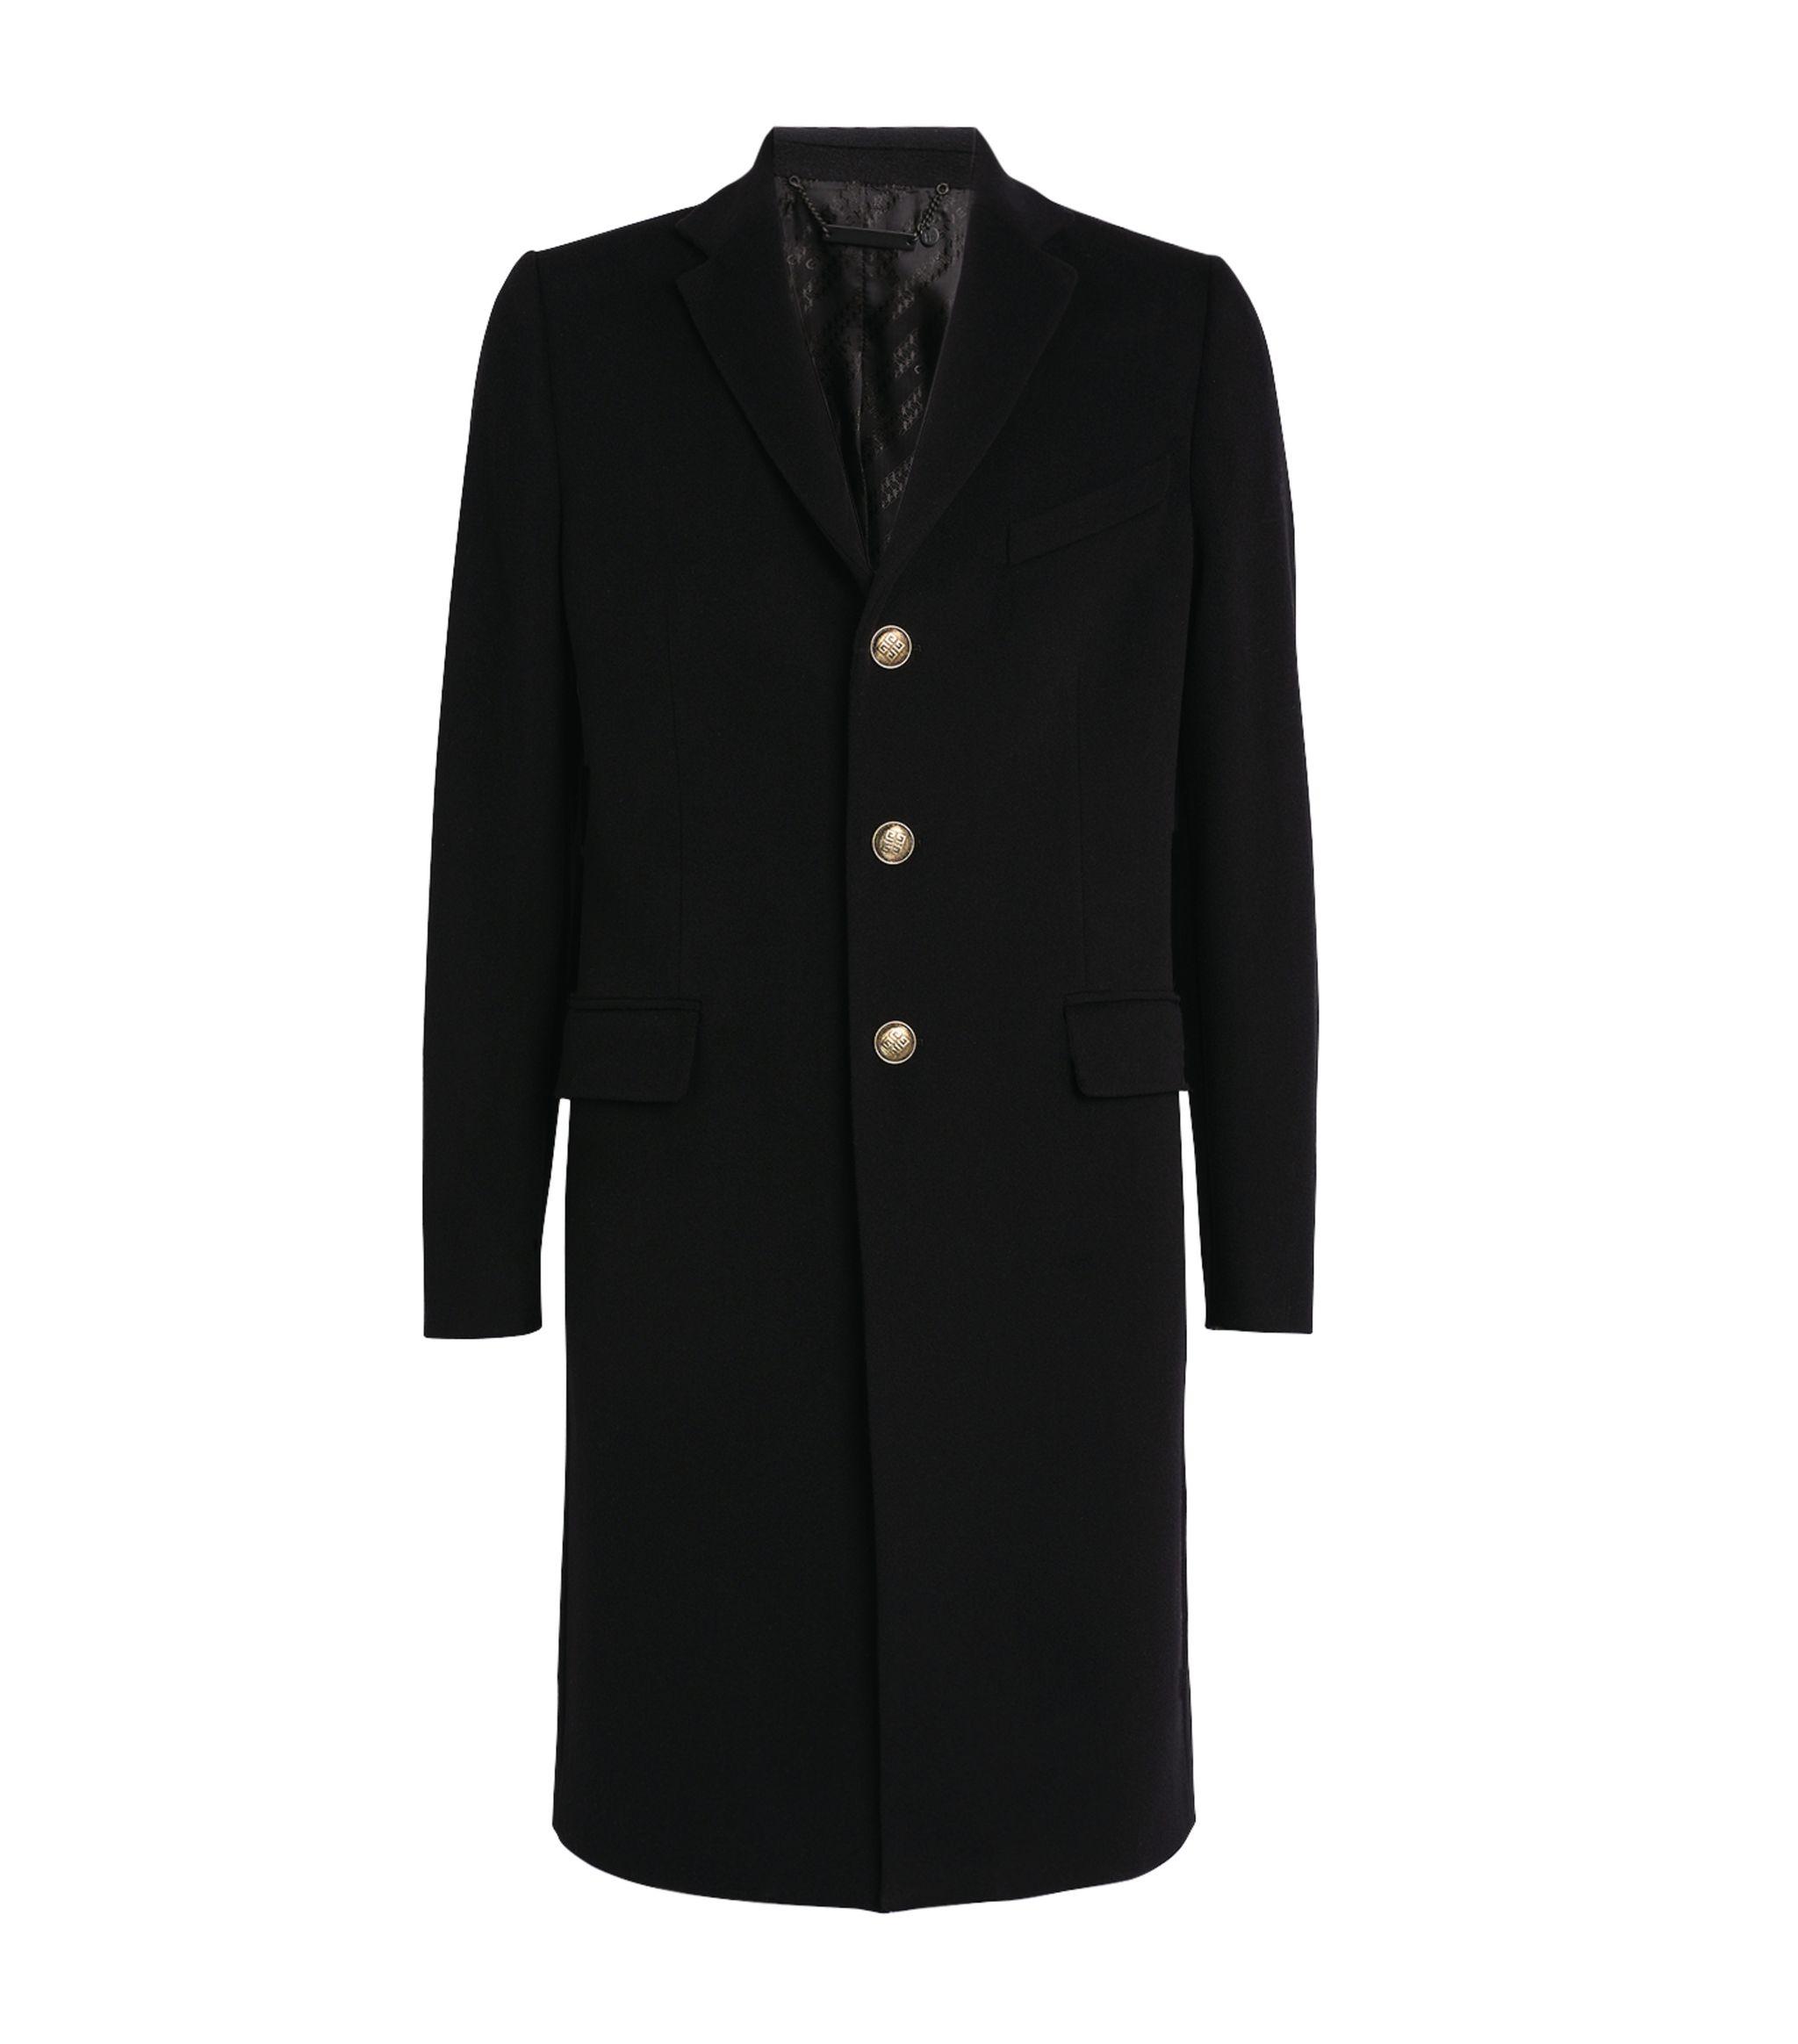 Givenchy Wool Tailored Overcoat in Black for Men - Lyst